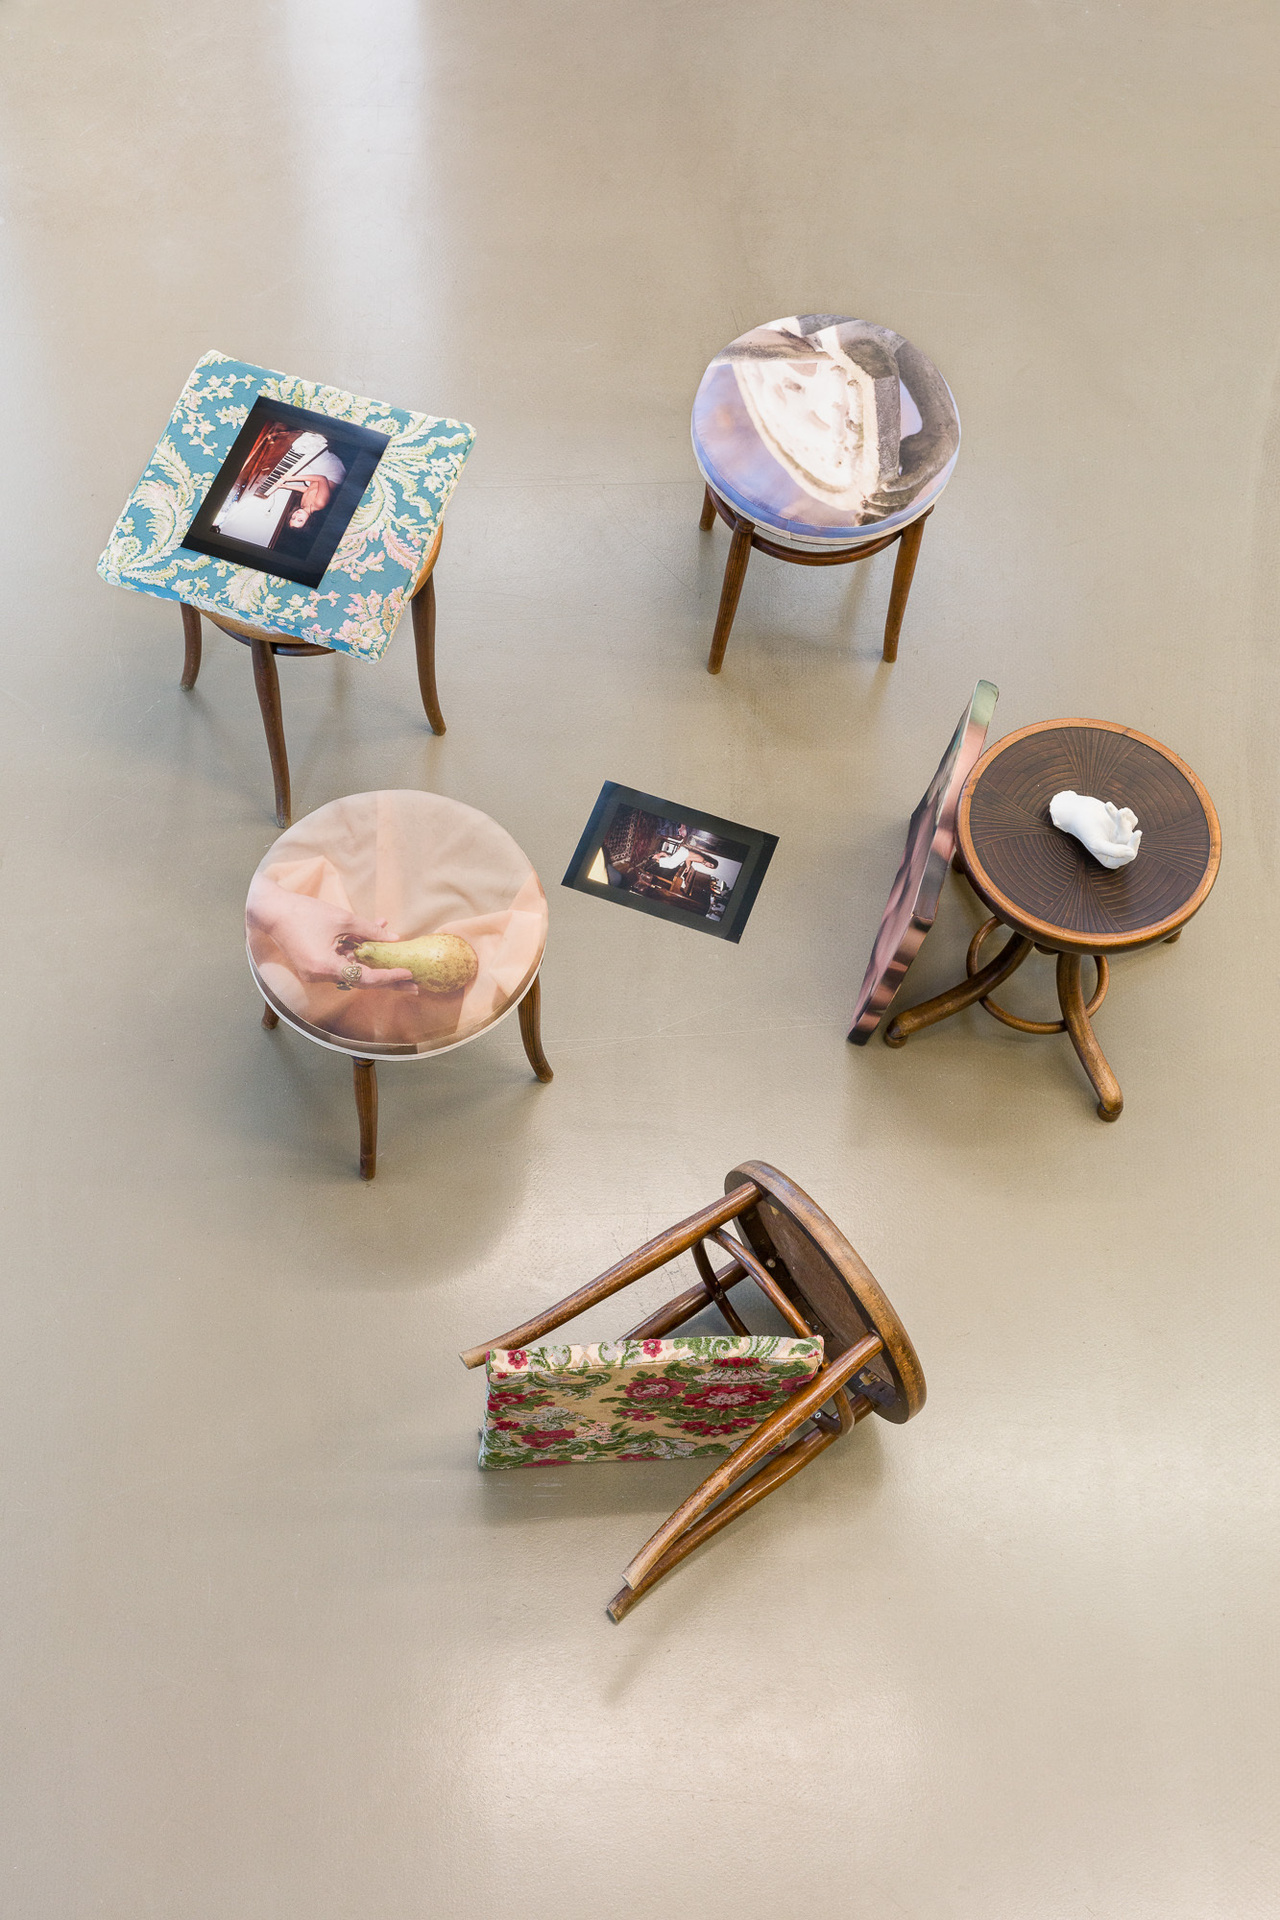 Anaïs Horn: Portraits of a Paralyzed Hand, 2021. Installation with 5 antique Thonet piano stools, upholstering with photo prints on furniture velours, 3 cushions, photo prints on cotton satin and vintage fabrics, 50 × 50 cm each; childhood portraits, 2 Lamb- da c-prints, 29.7 × 21 cm each; My Right Hand, 2021, plaster cast, ca. 20 × 15 cm.